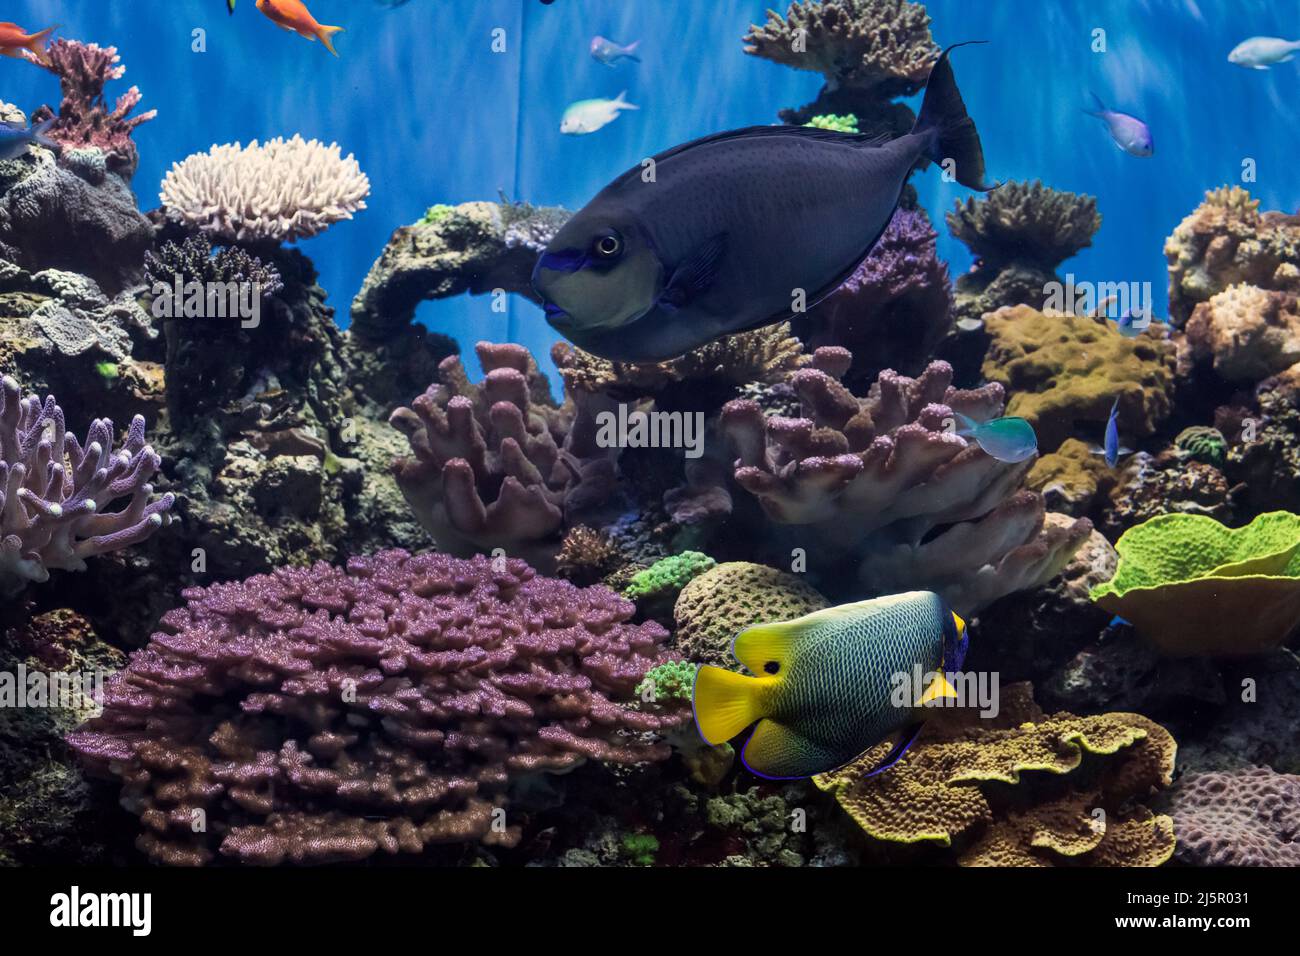 Close-up shot of a colorful aquarium with tropical fishes and corals of the West Pacific Ocean Stock Photo